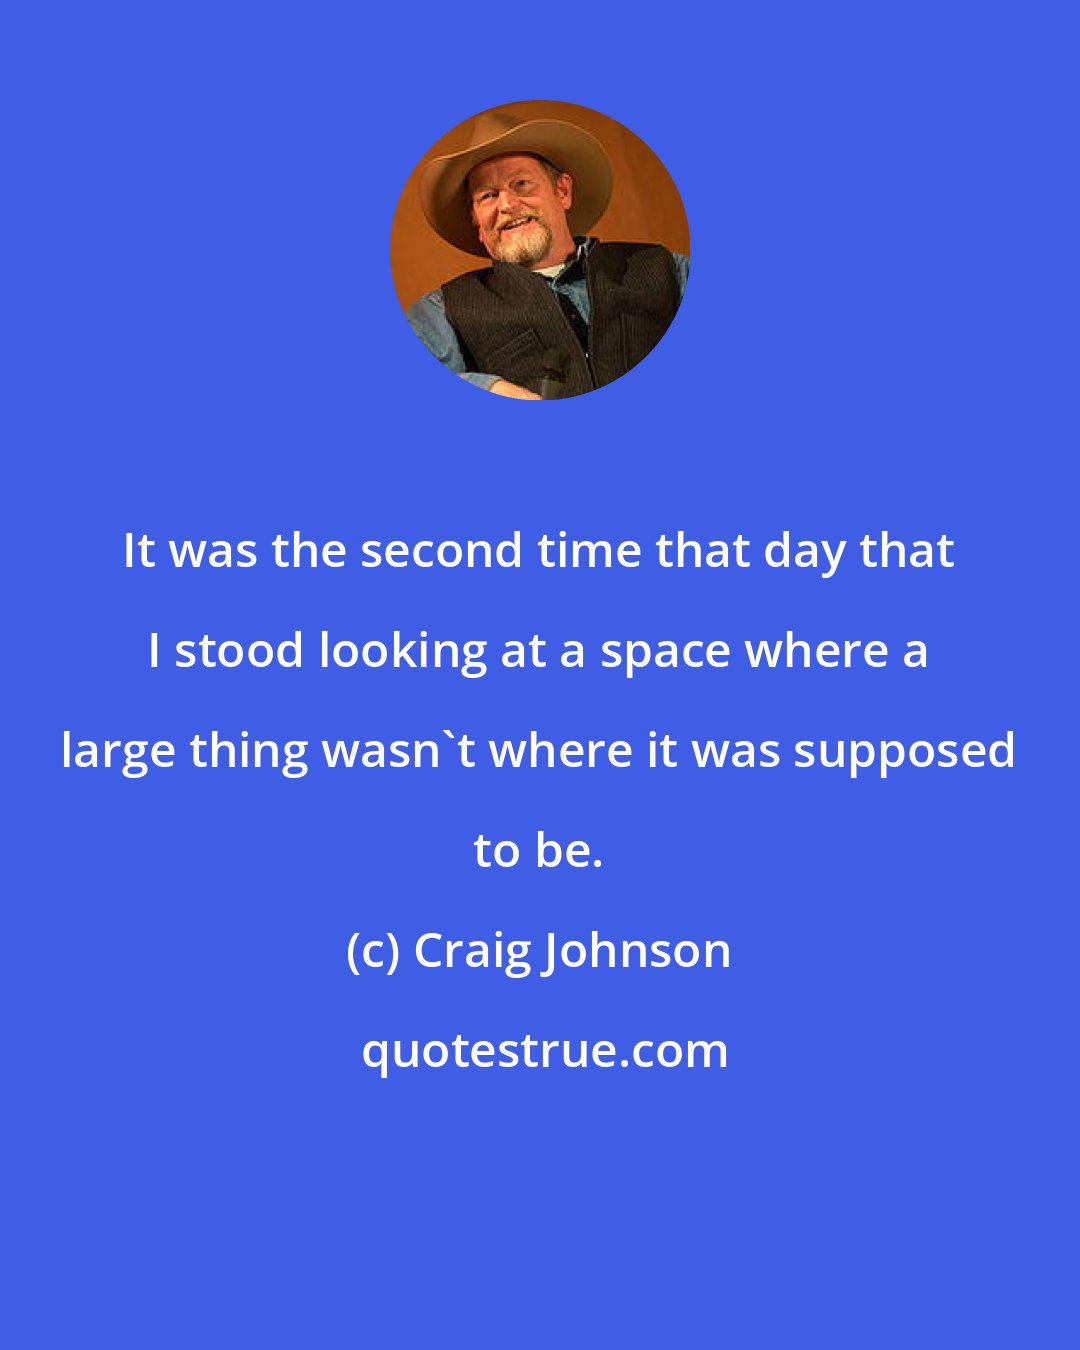 Craig Johnson: It was the second time that day that I stood looking at a space where a large thing wasn't where it was supposed to be.